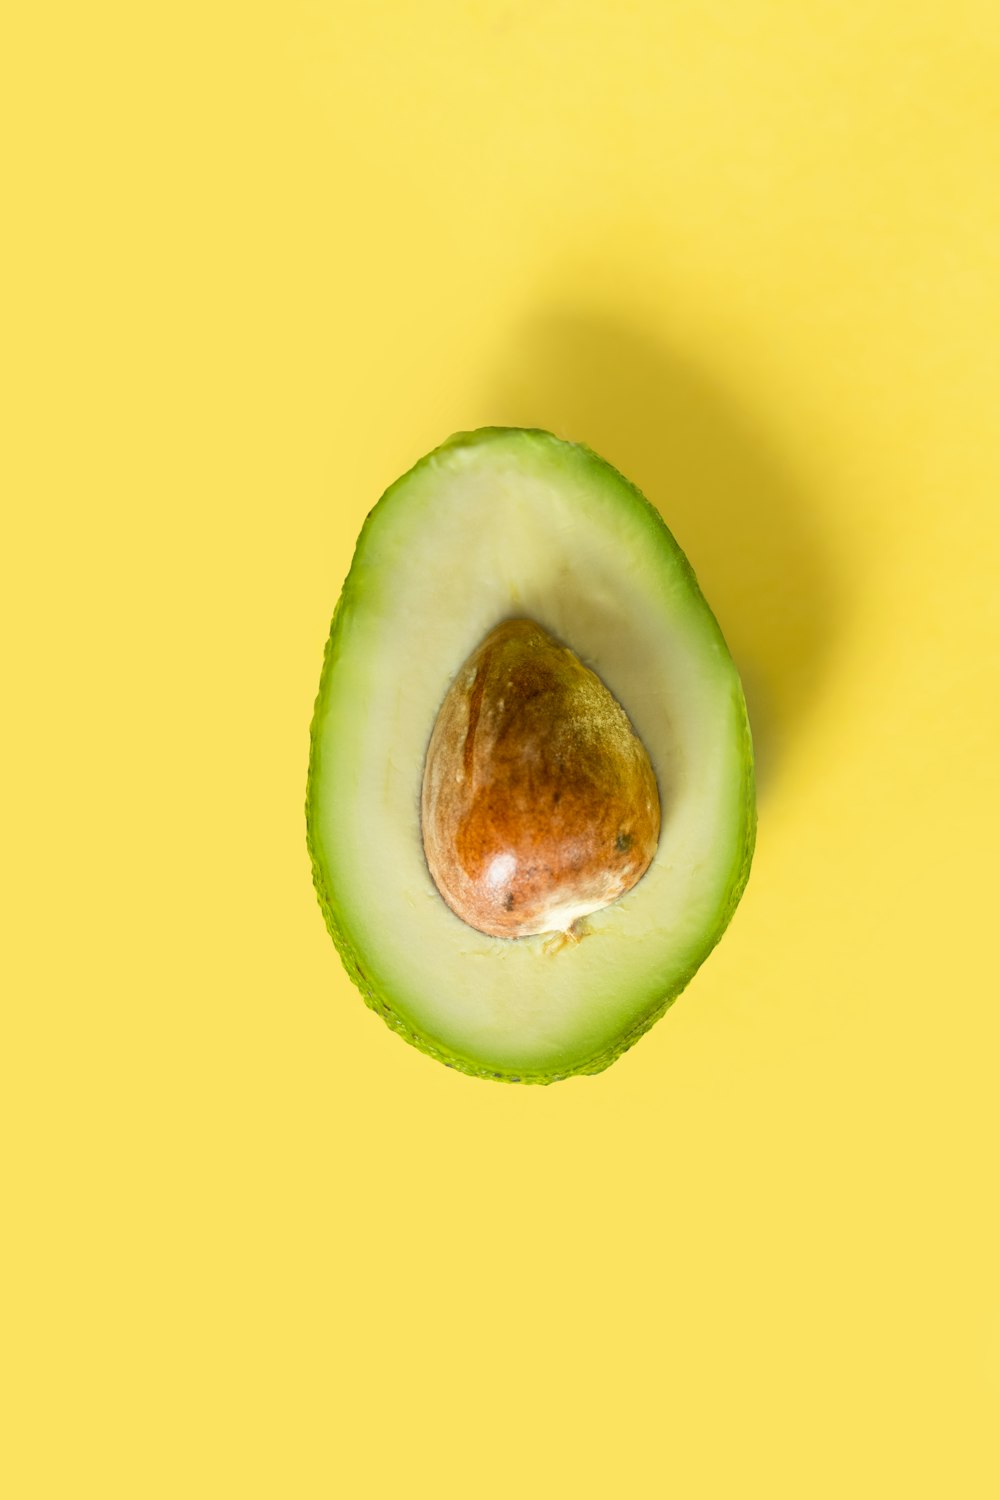 an avocado cut in half on a yellow background